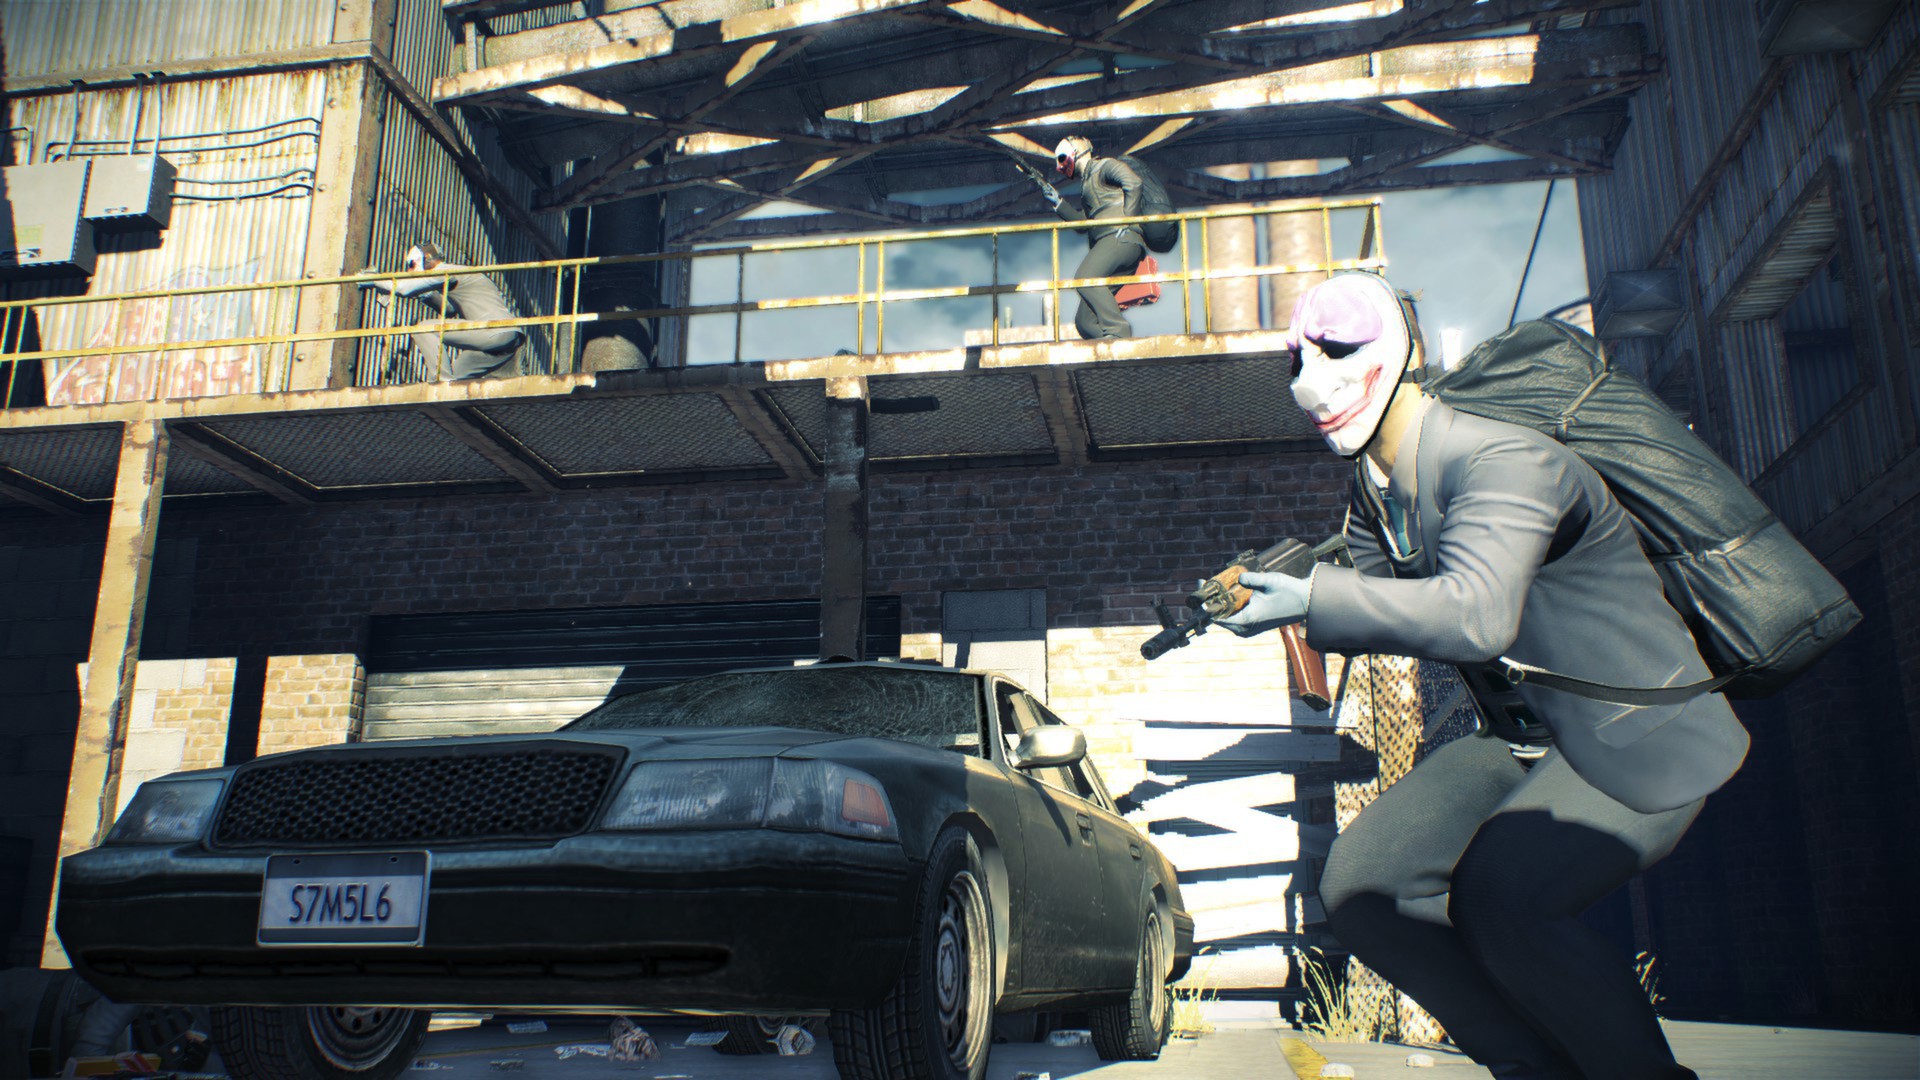 PAYDAY The Heist System Requirements - Can I Run It? - PCGameBenchmark